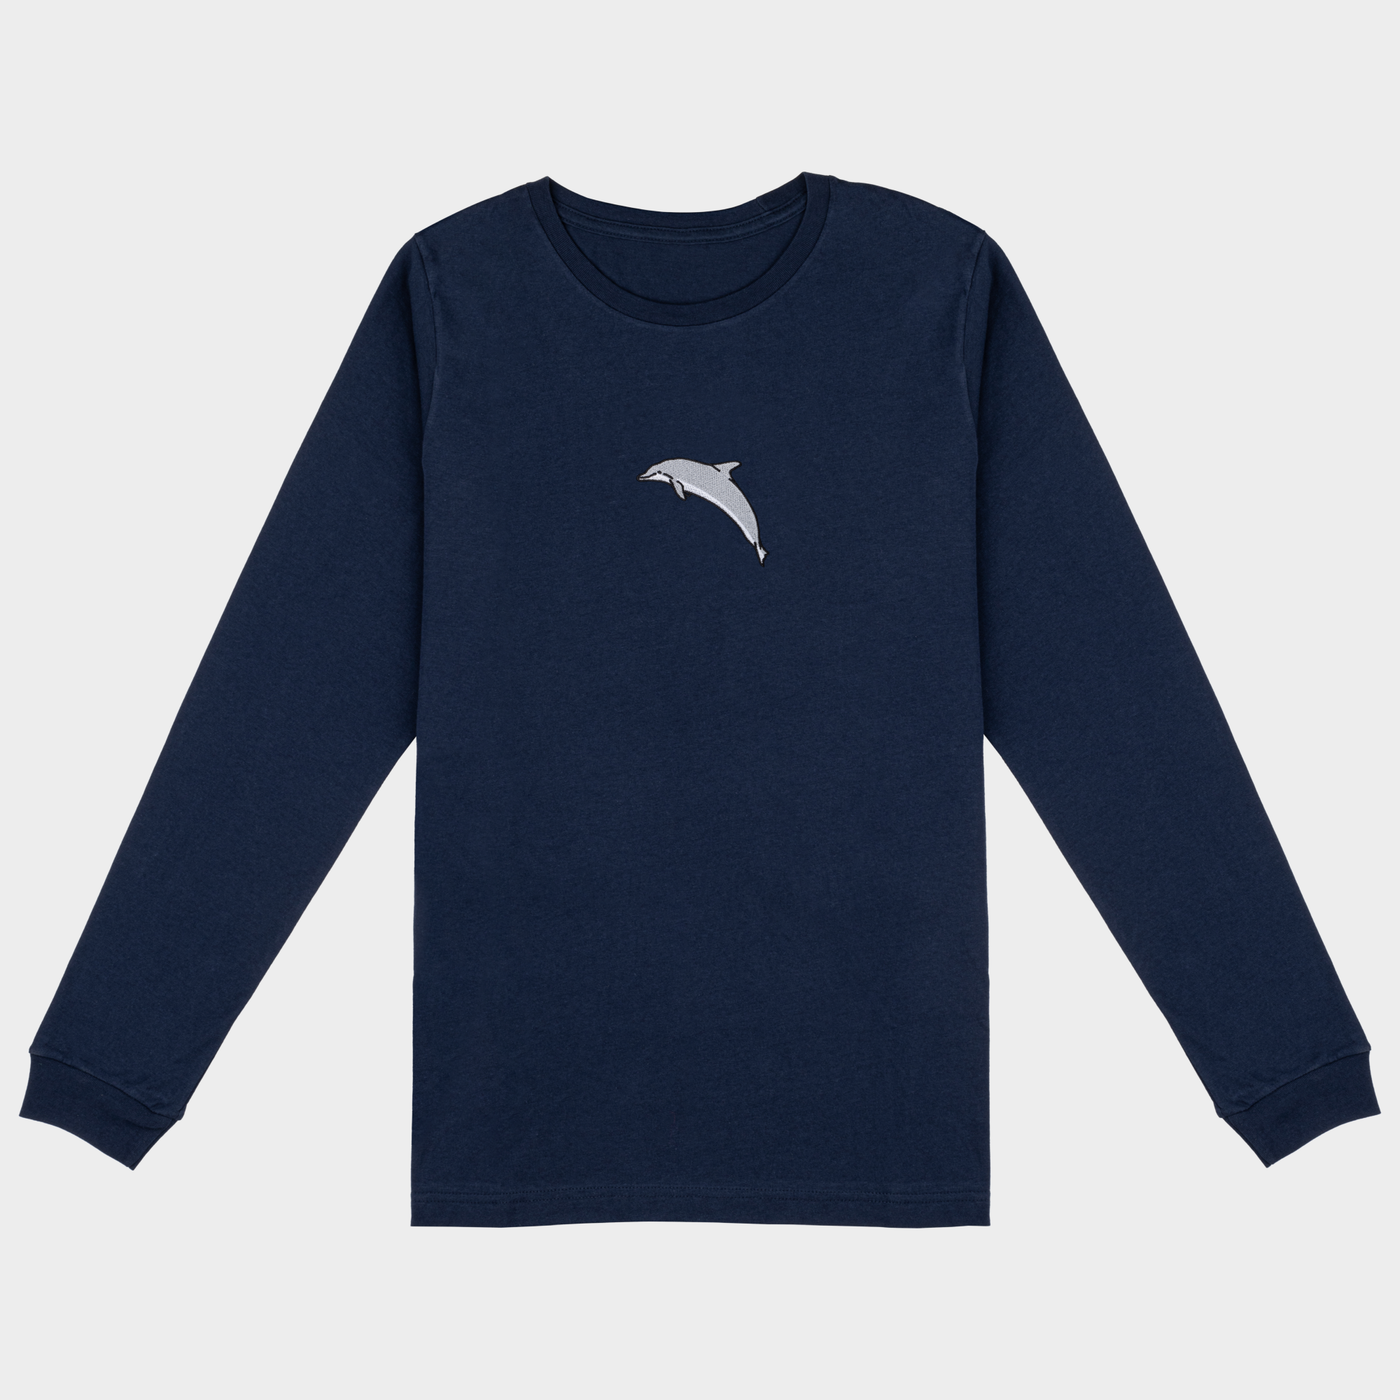 Bobby's Planet Women's Embroidered Dolphin Long Sleeve Shirt from Seven Seas Fish Animals Collection in Navy Color#color_navy